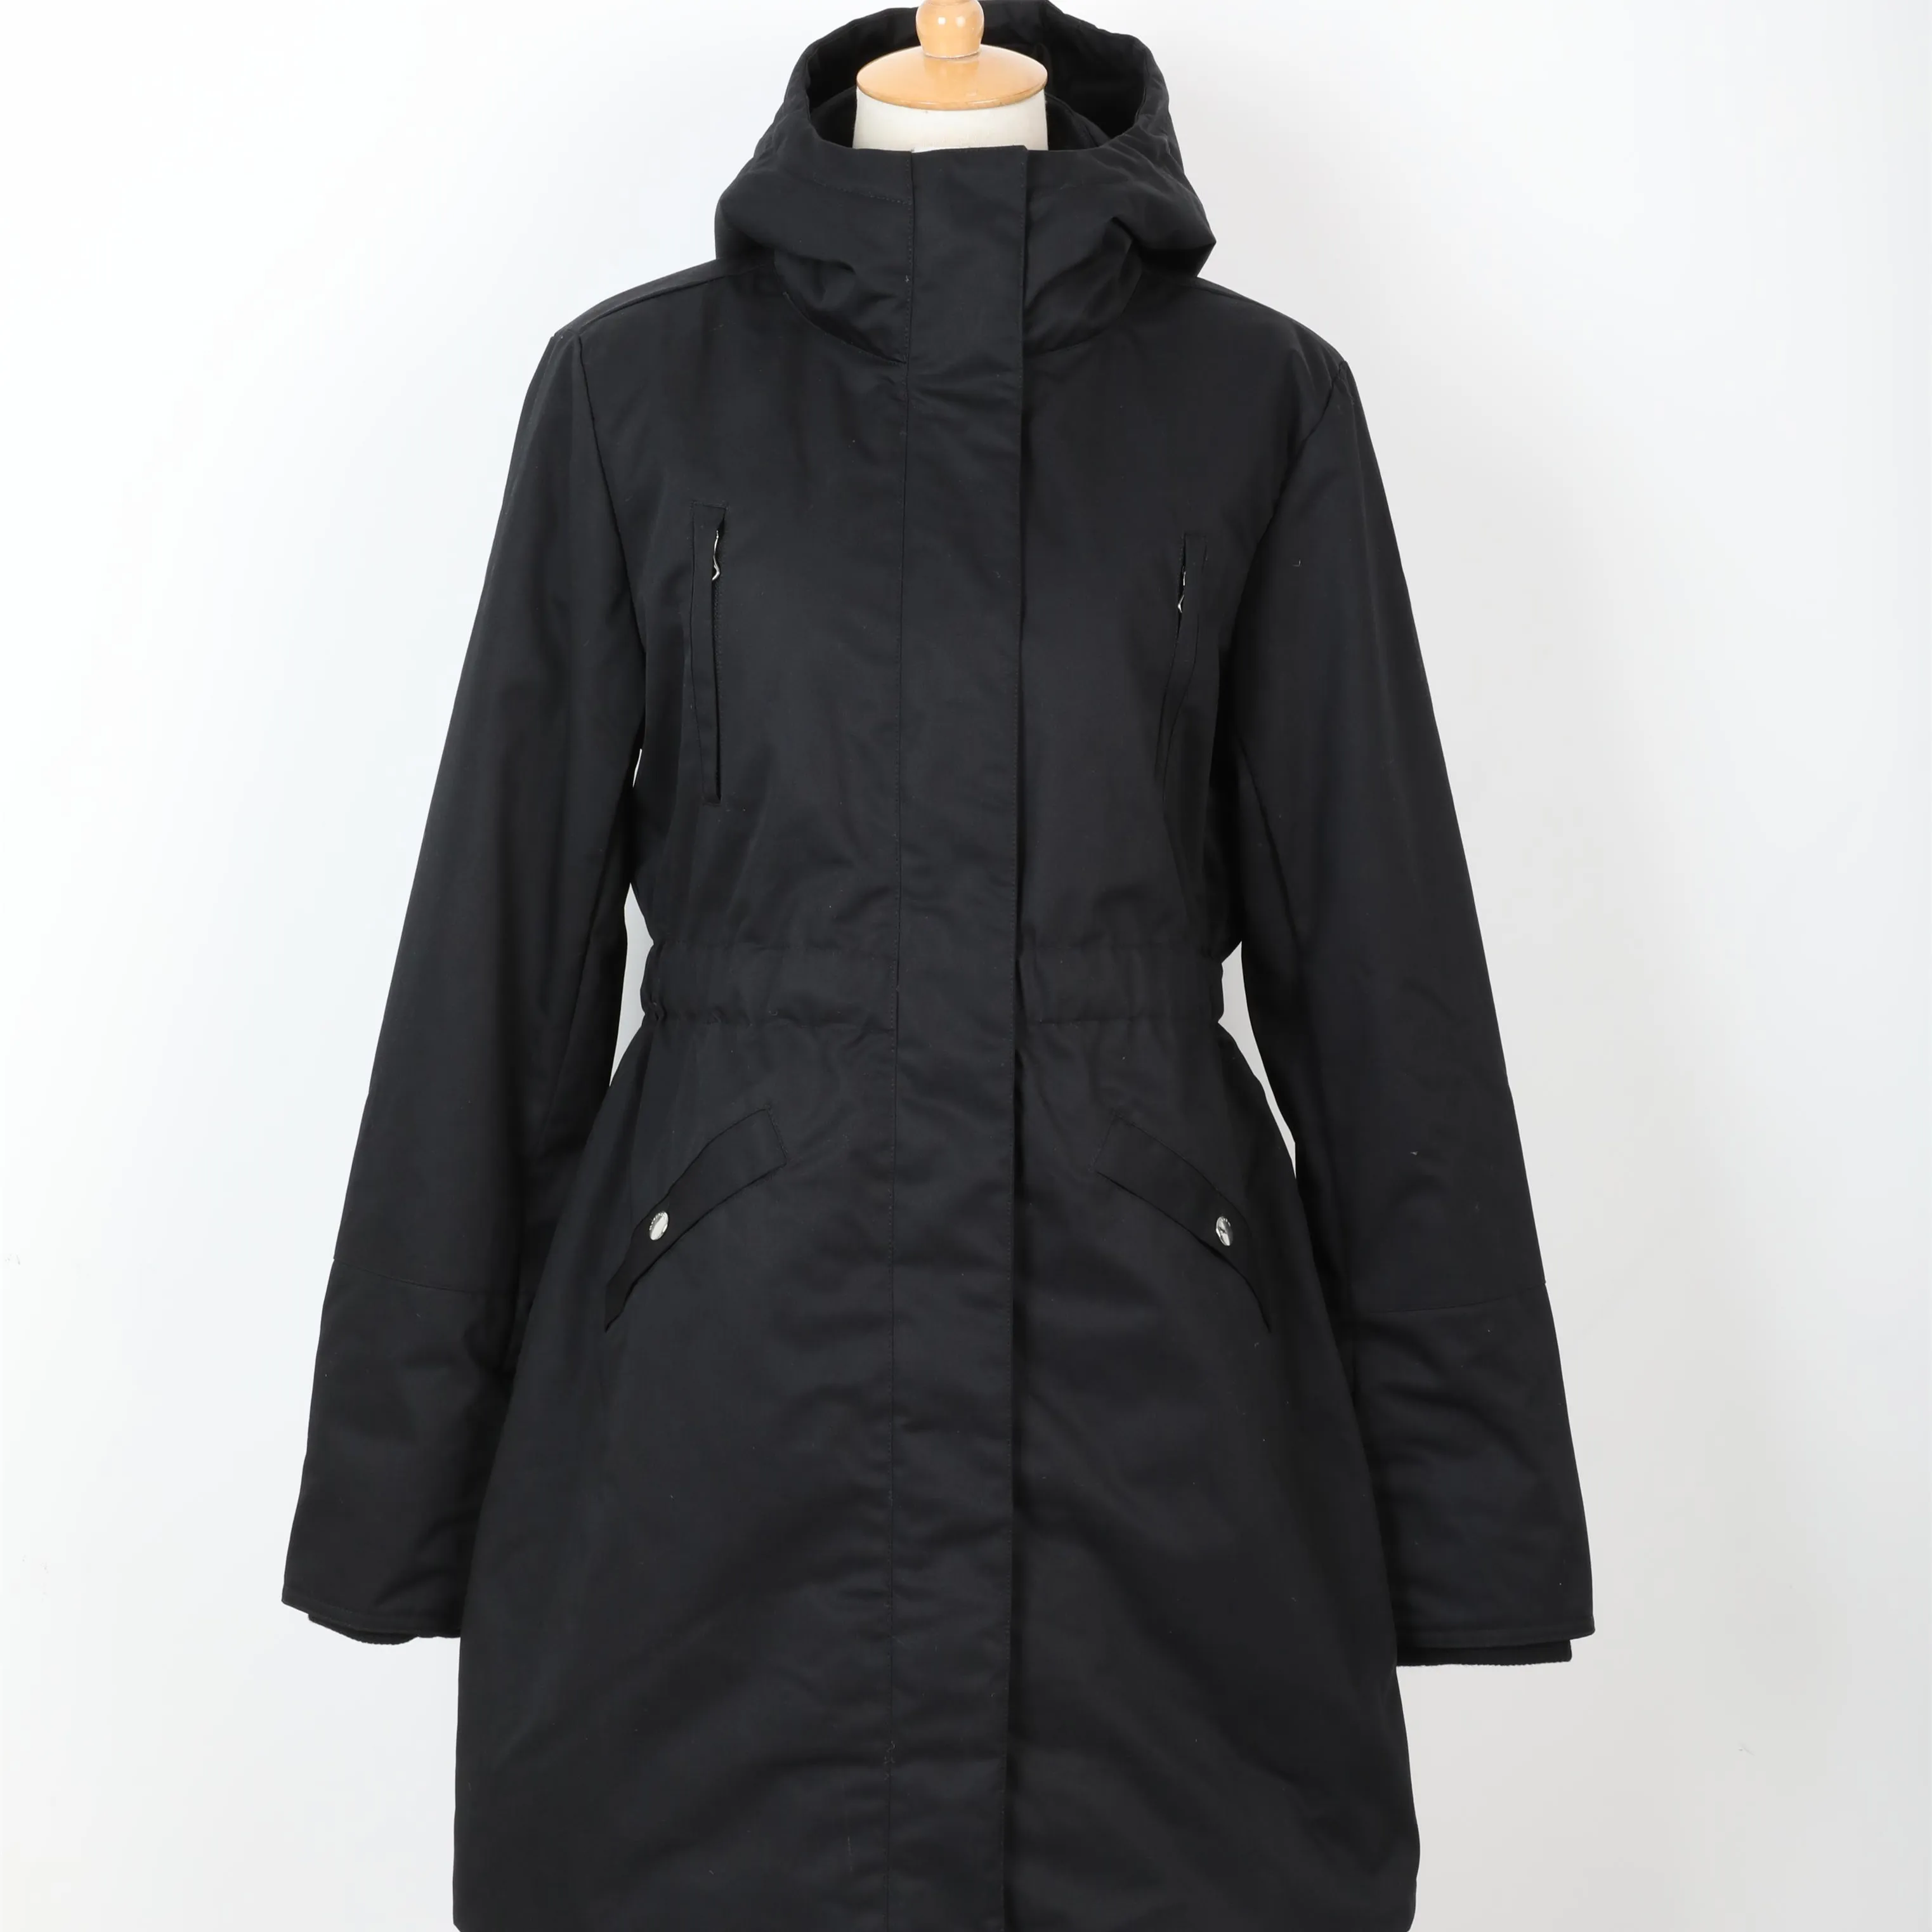 Fashion Style women Custom coat winter Long Quilting Padded coats outdoor clothing